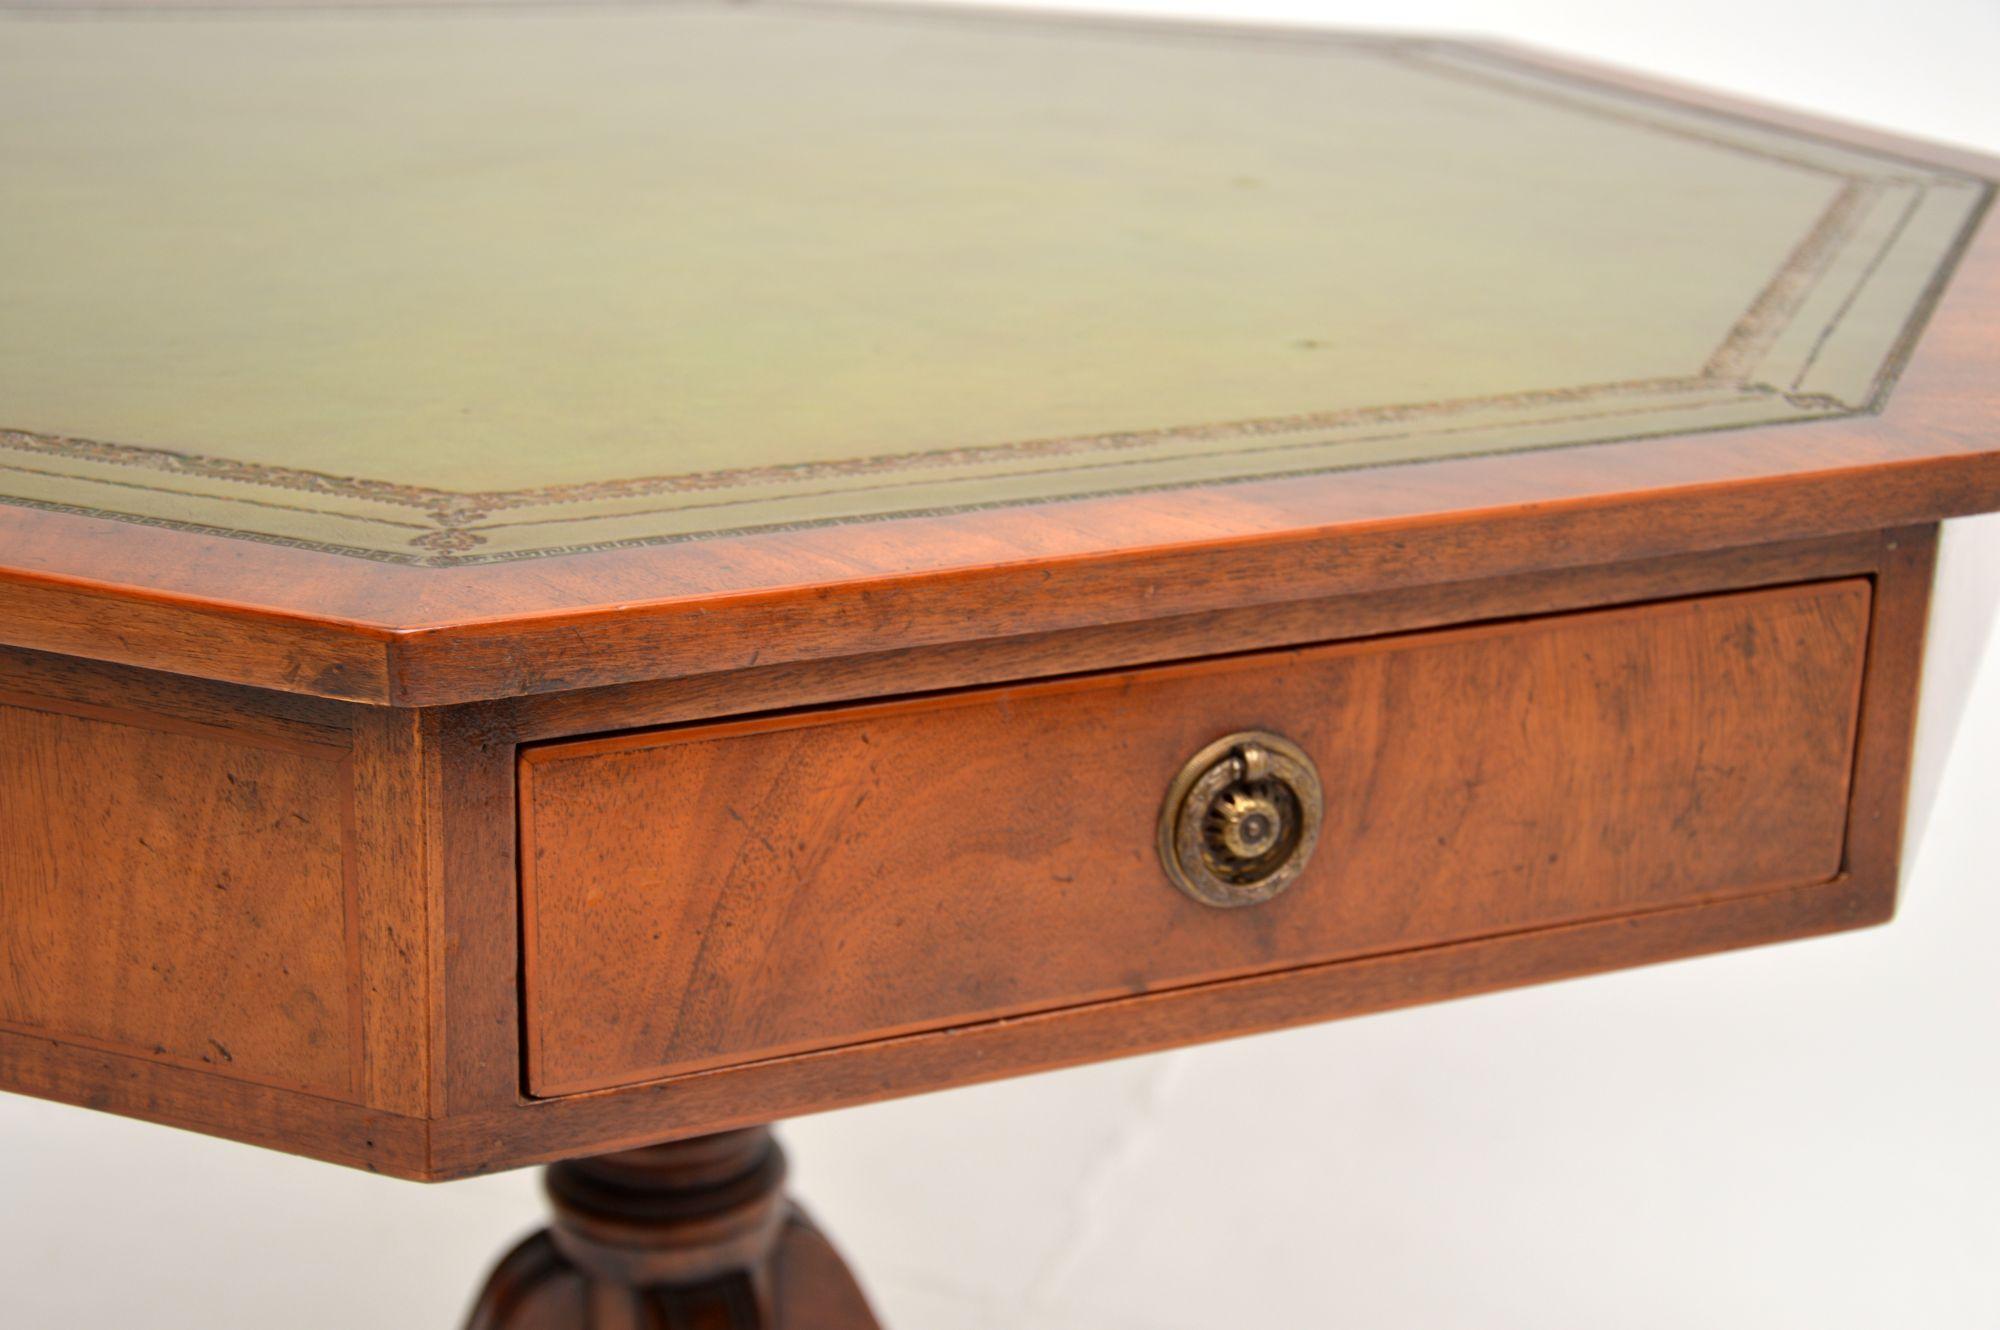 20th Century Antique Leather Top Octagonal Drum Table